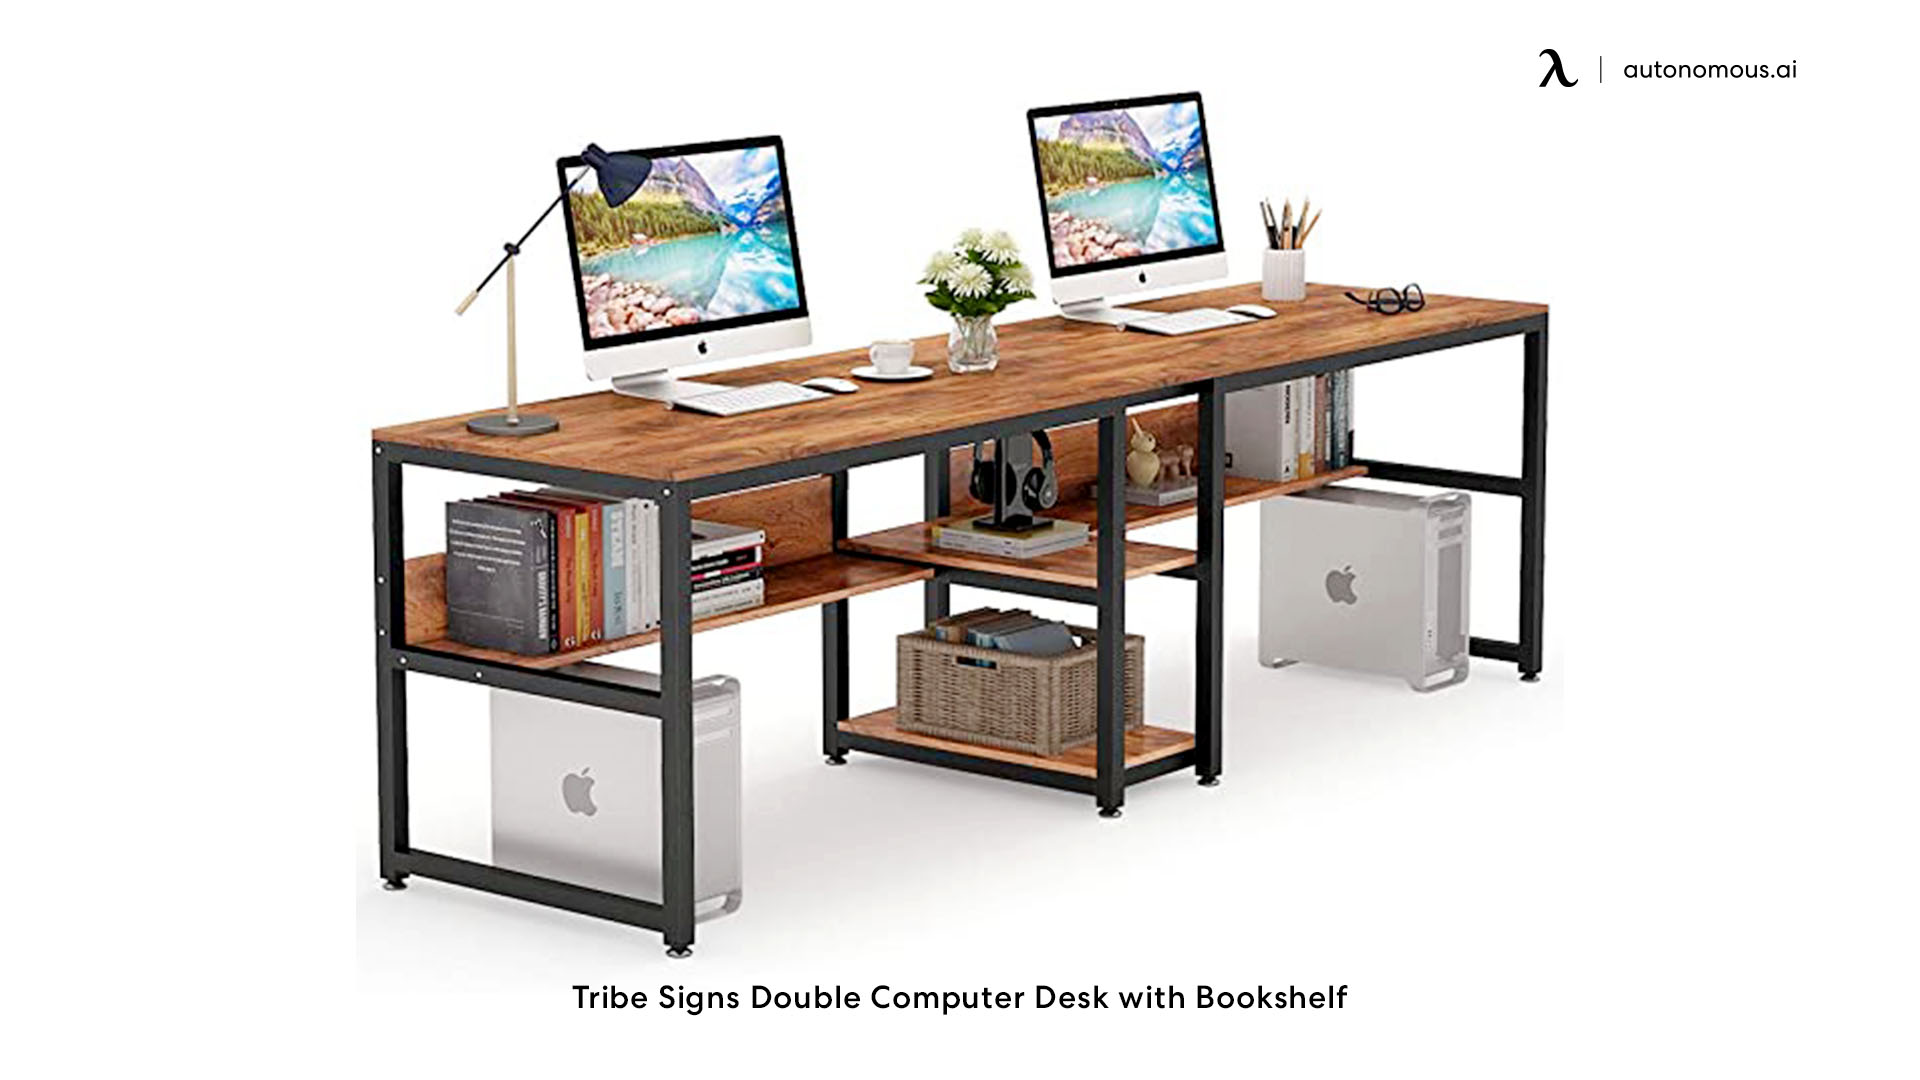 TribeSigns Double Computer Desk with Bookshelf